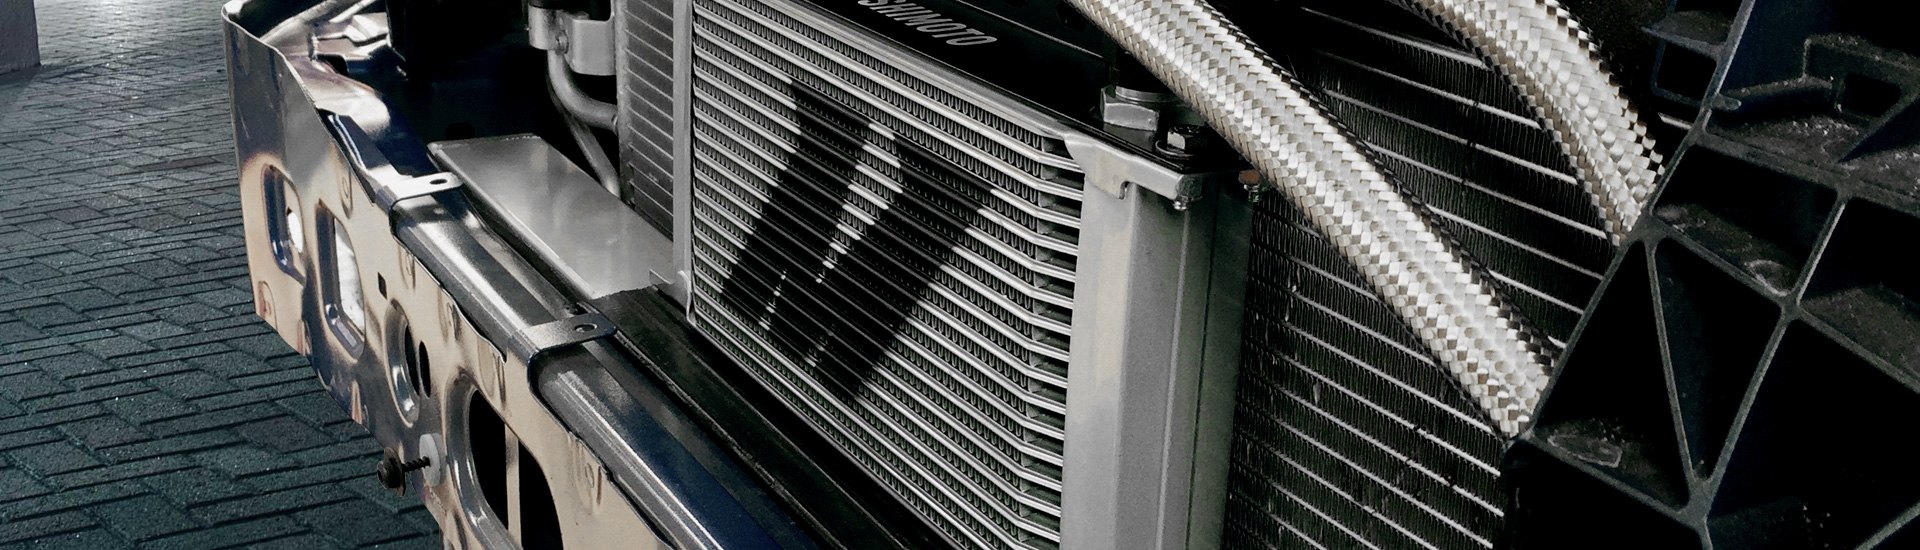 Auxiliary Oil Coolers Keep Engine Oil Temperature Under Control